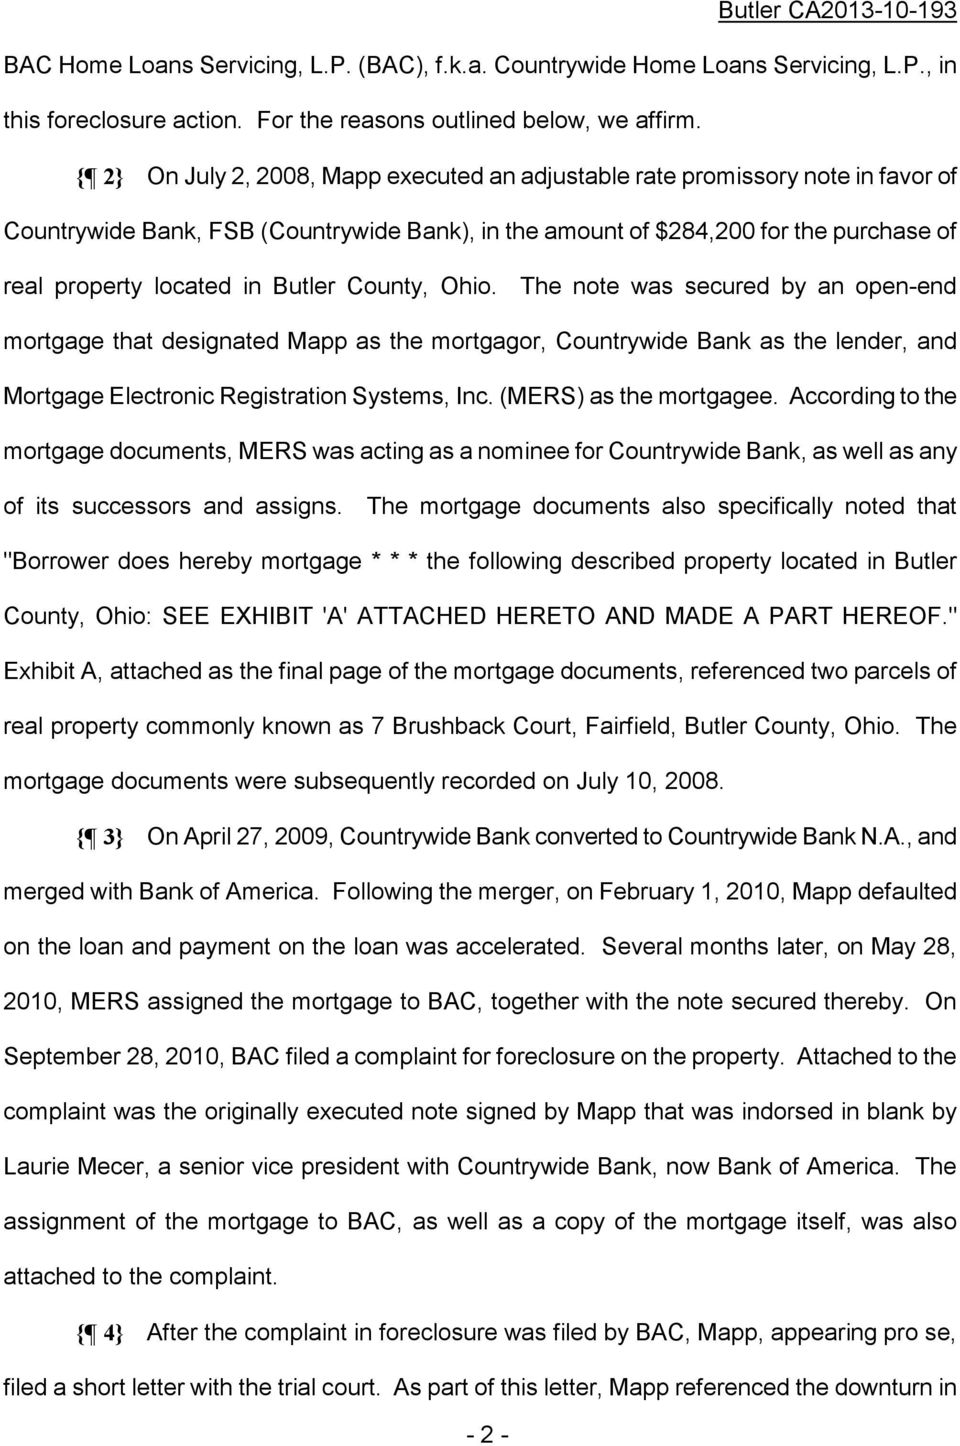 Butler County, Ohio. The note was secured by an open-end mortgage that designated Mapp as the mortgagor, Countrywide Bank as the lender, and Mortgage Electronic Registration Systems, Inc.